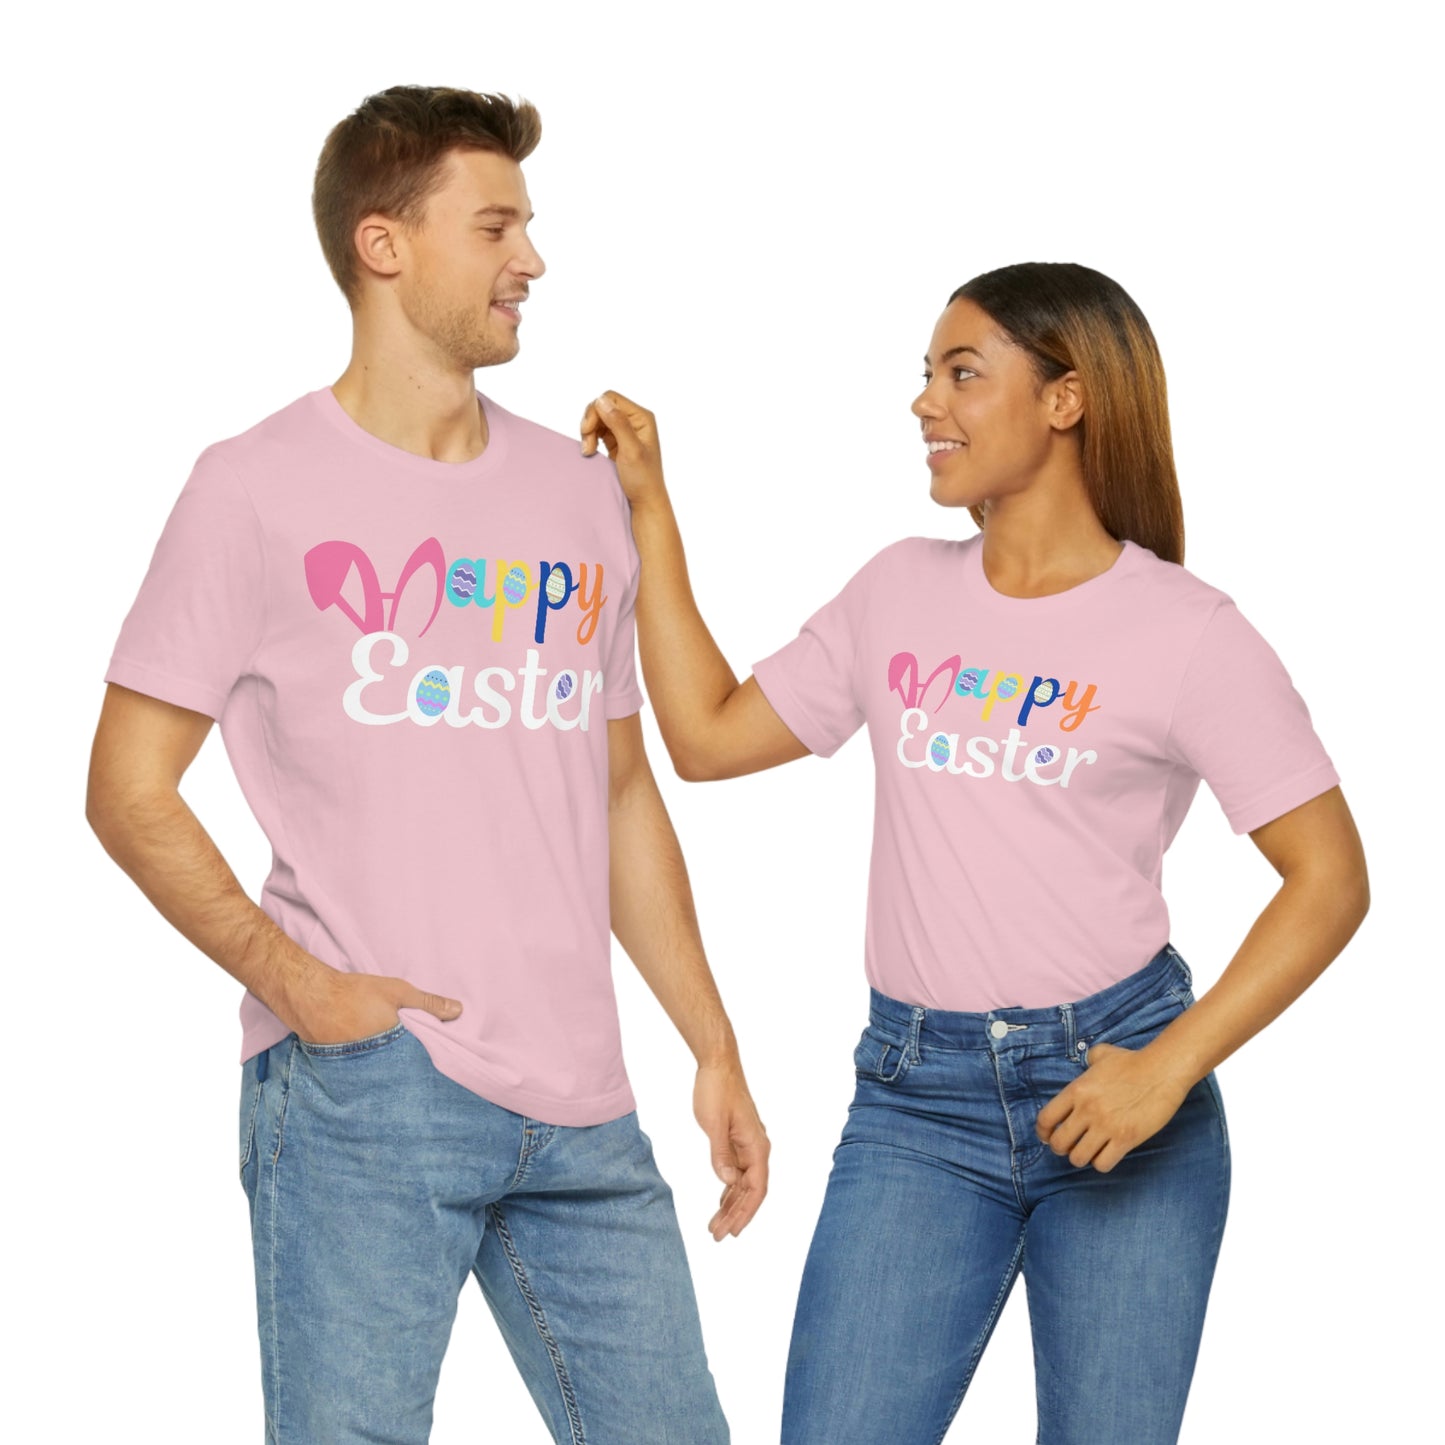 Happy Easter Tshirt, Easter gift for Adults